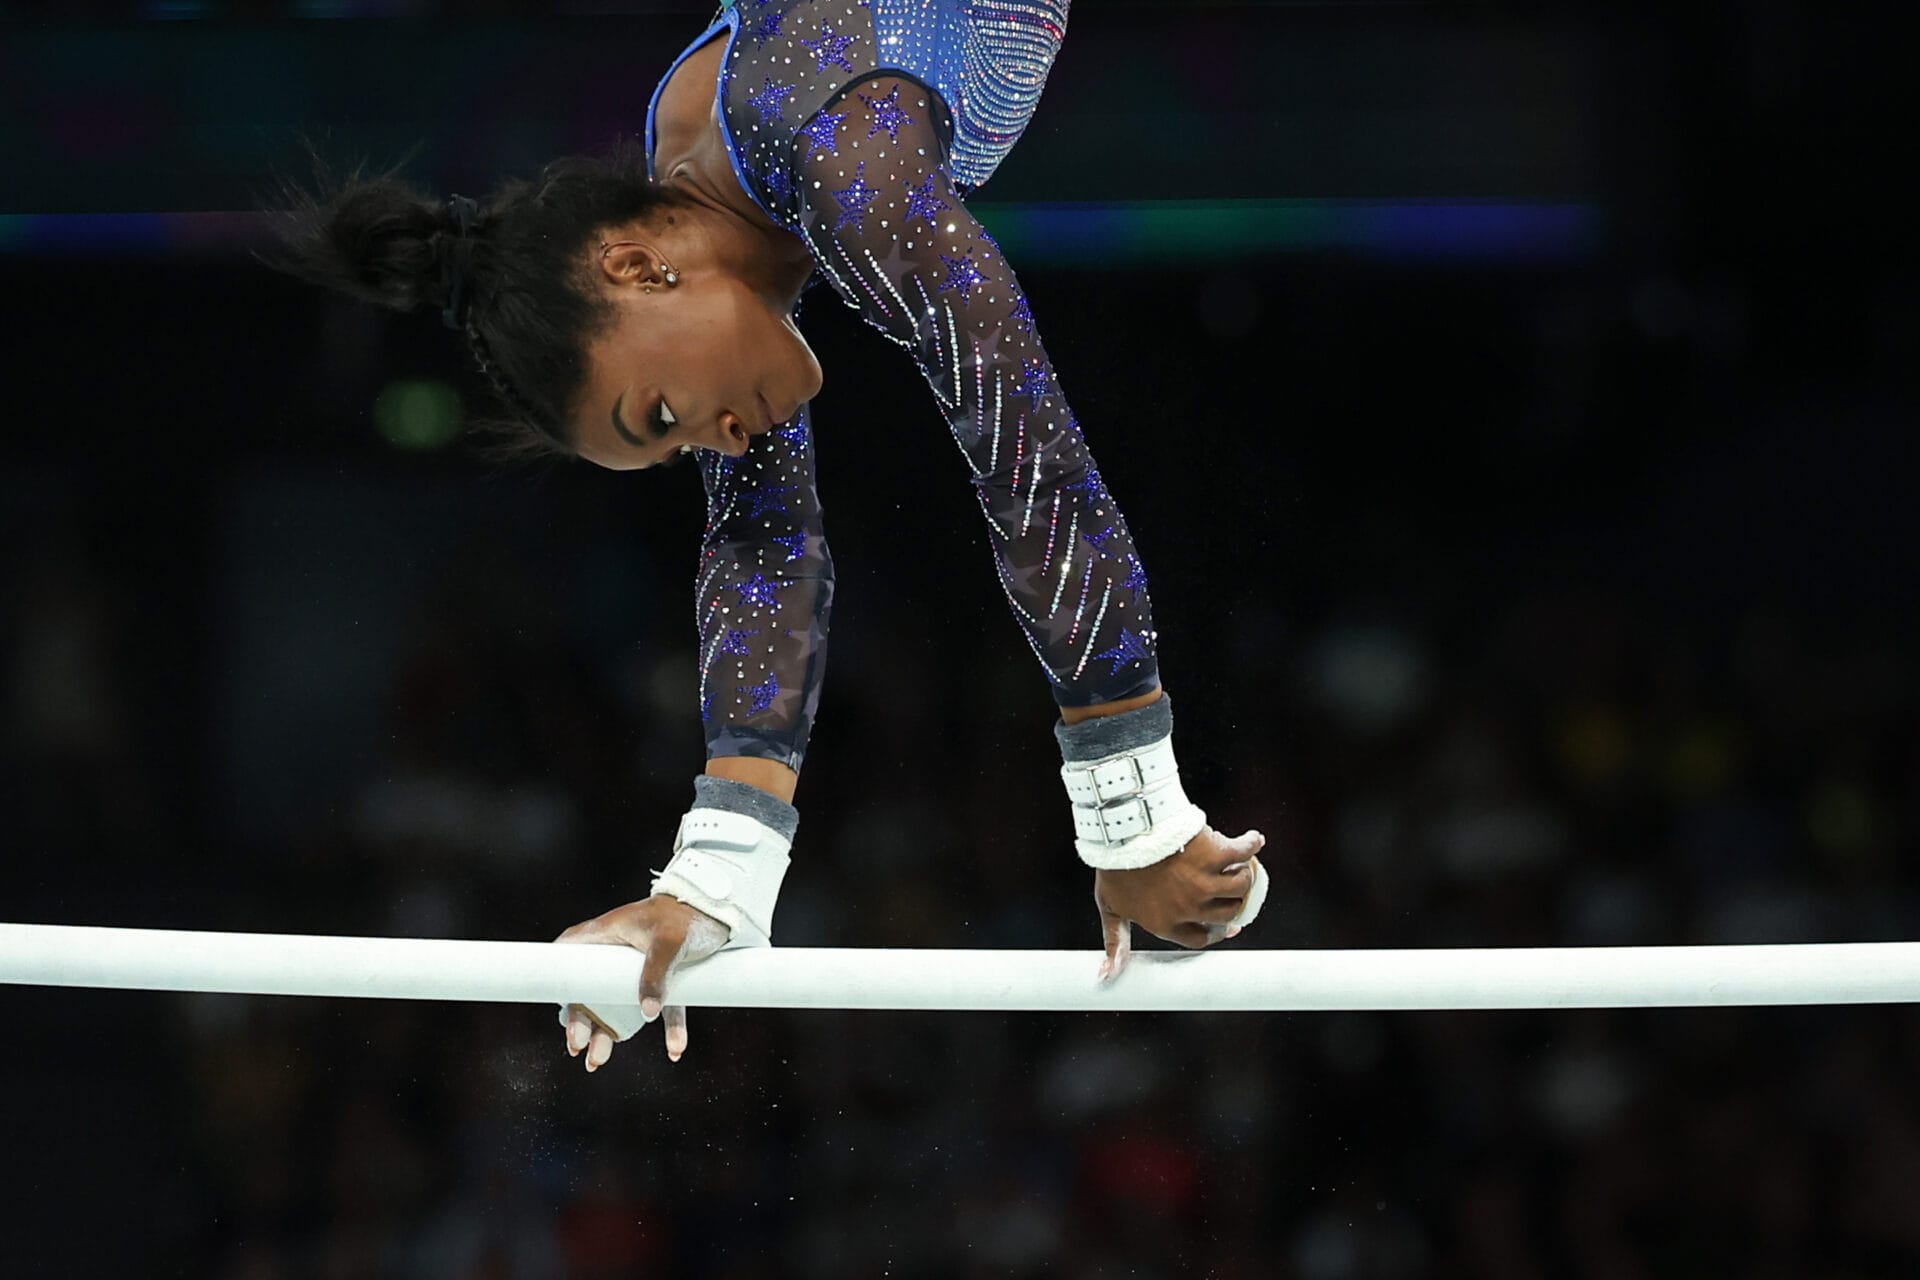 PARIS, FRANCE - AUGUST 01: Olympic Champion and Gold Medal Winner Simone Biles of Team United States competes on unever bars during the women's Artistic Gymnastics All-Around Final on day six of the Olympic Games Paris 2024 at Bercy Arena on August 01, 2024 in Paris, France. (Photo by Stefan Matzke - sampics/Getty Images)